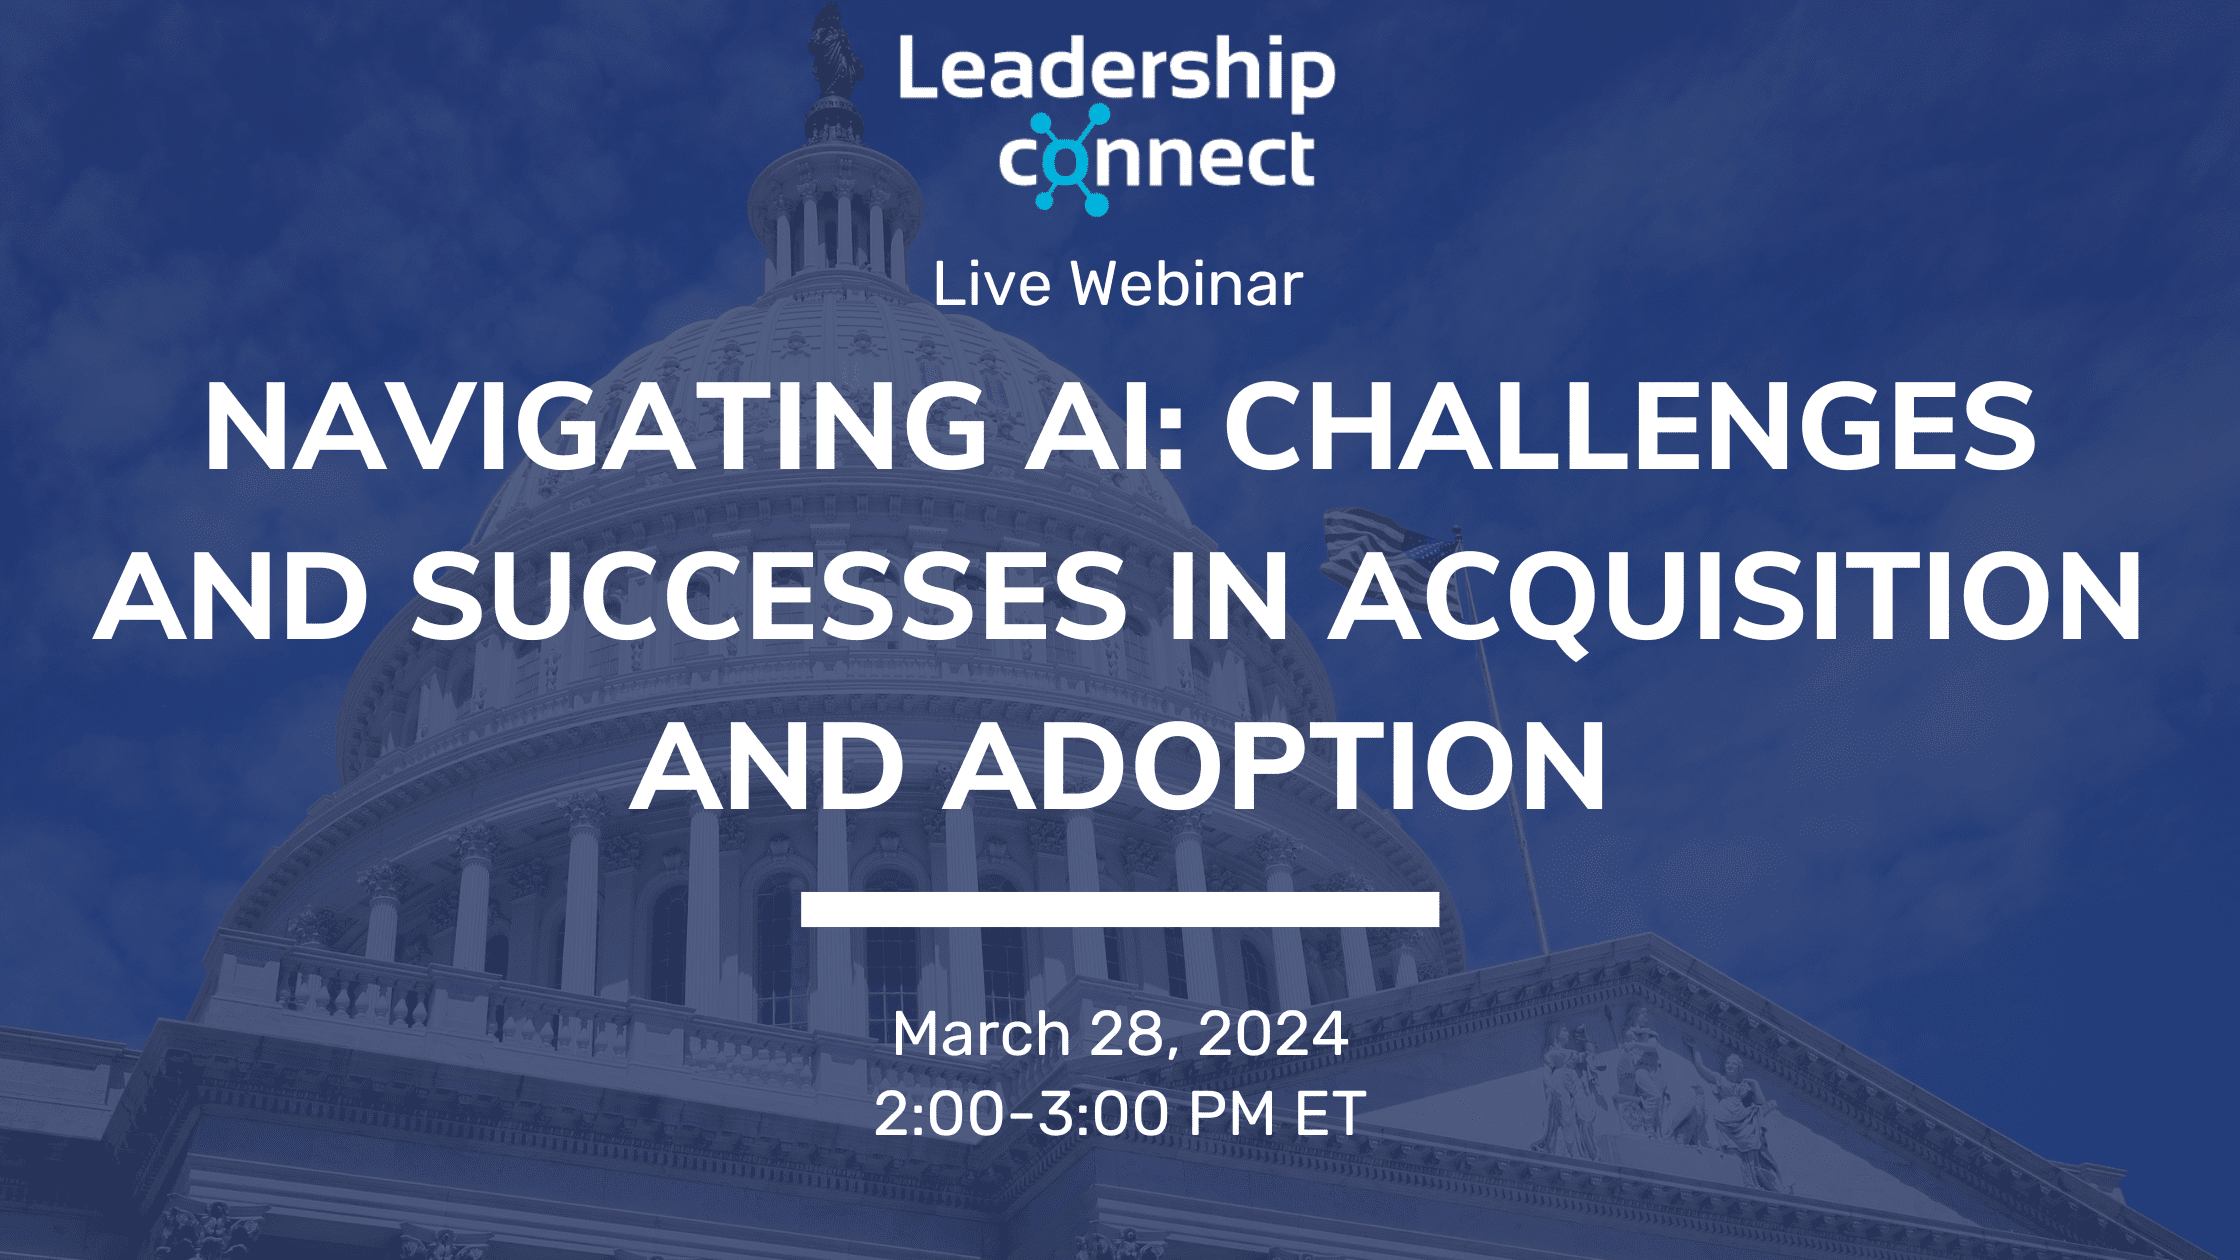 Navigating AI: Challenges and Successes in Acquisition and Adoption